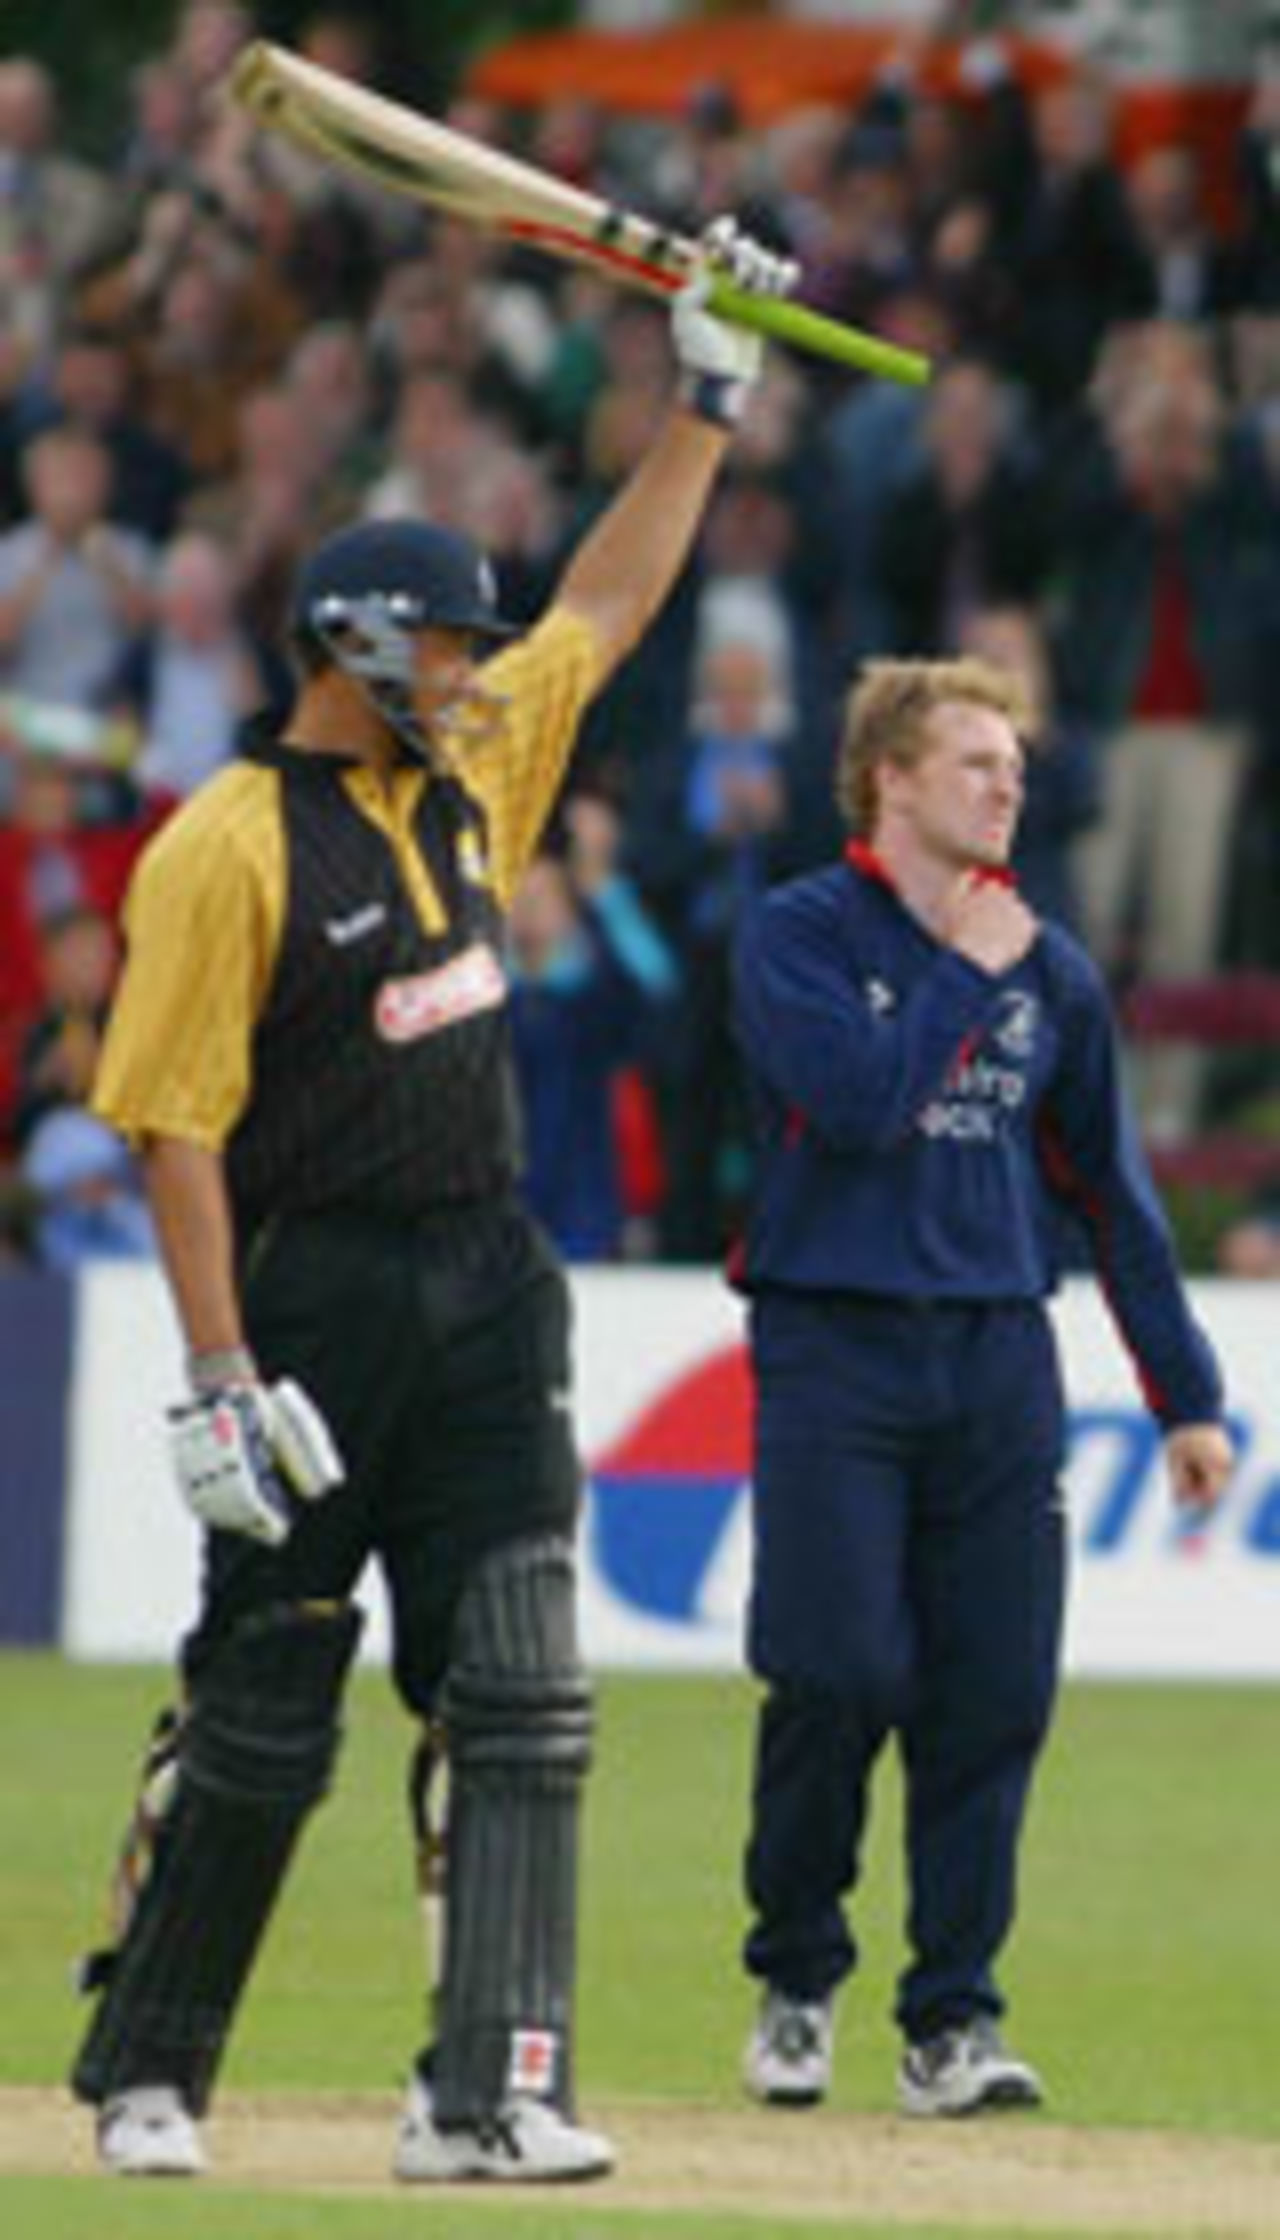 Andrew Symonds celebrates his century in a Twenty20 Cup match against Middlesex, July 2 2004